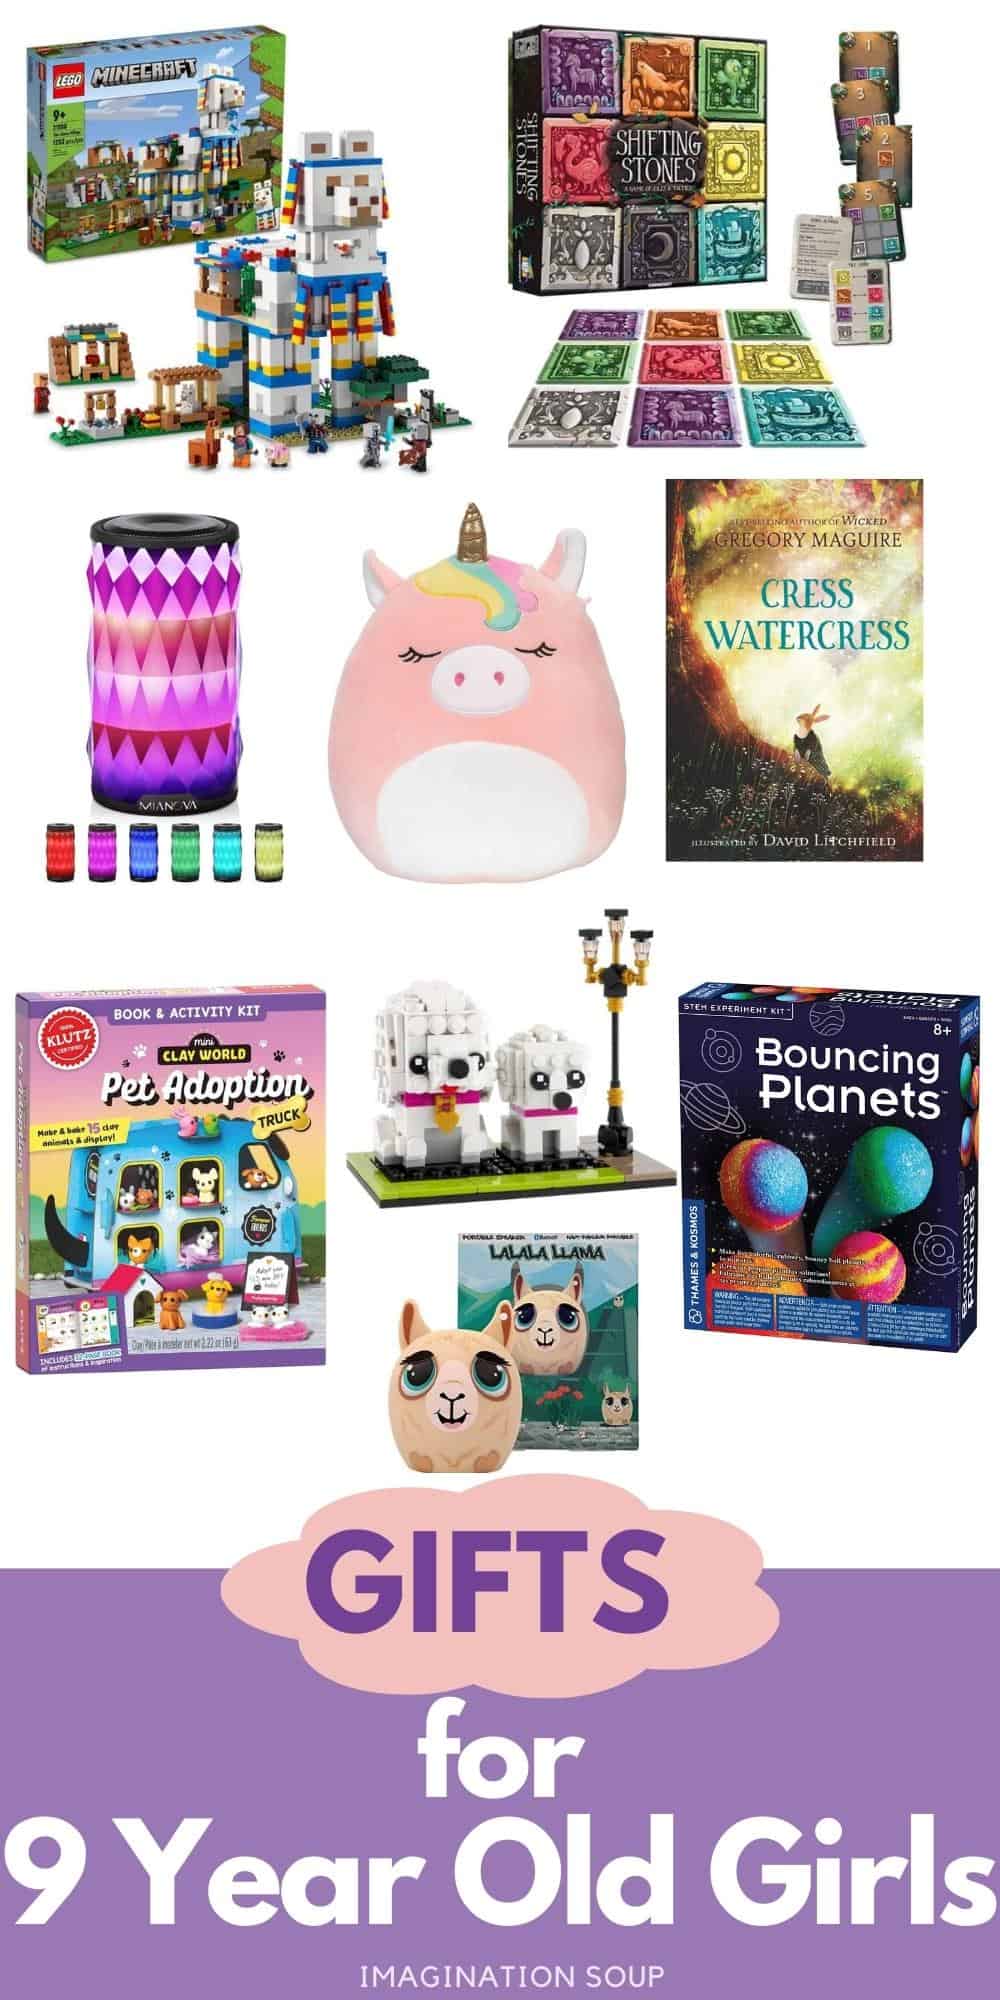 Gift ideas for 9 year old girls